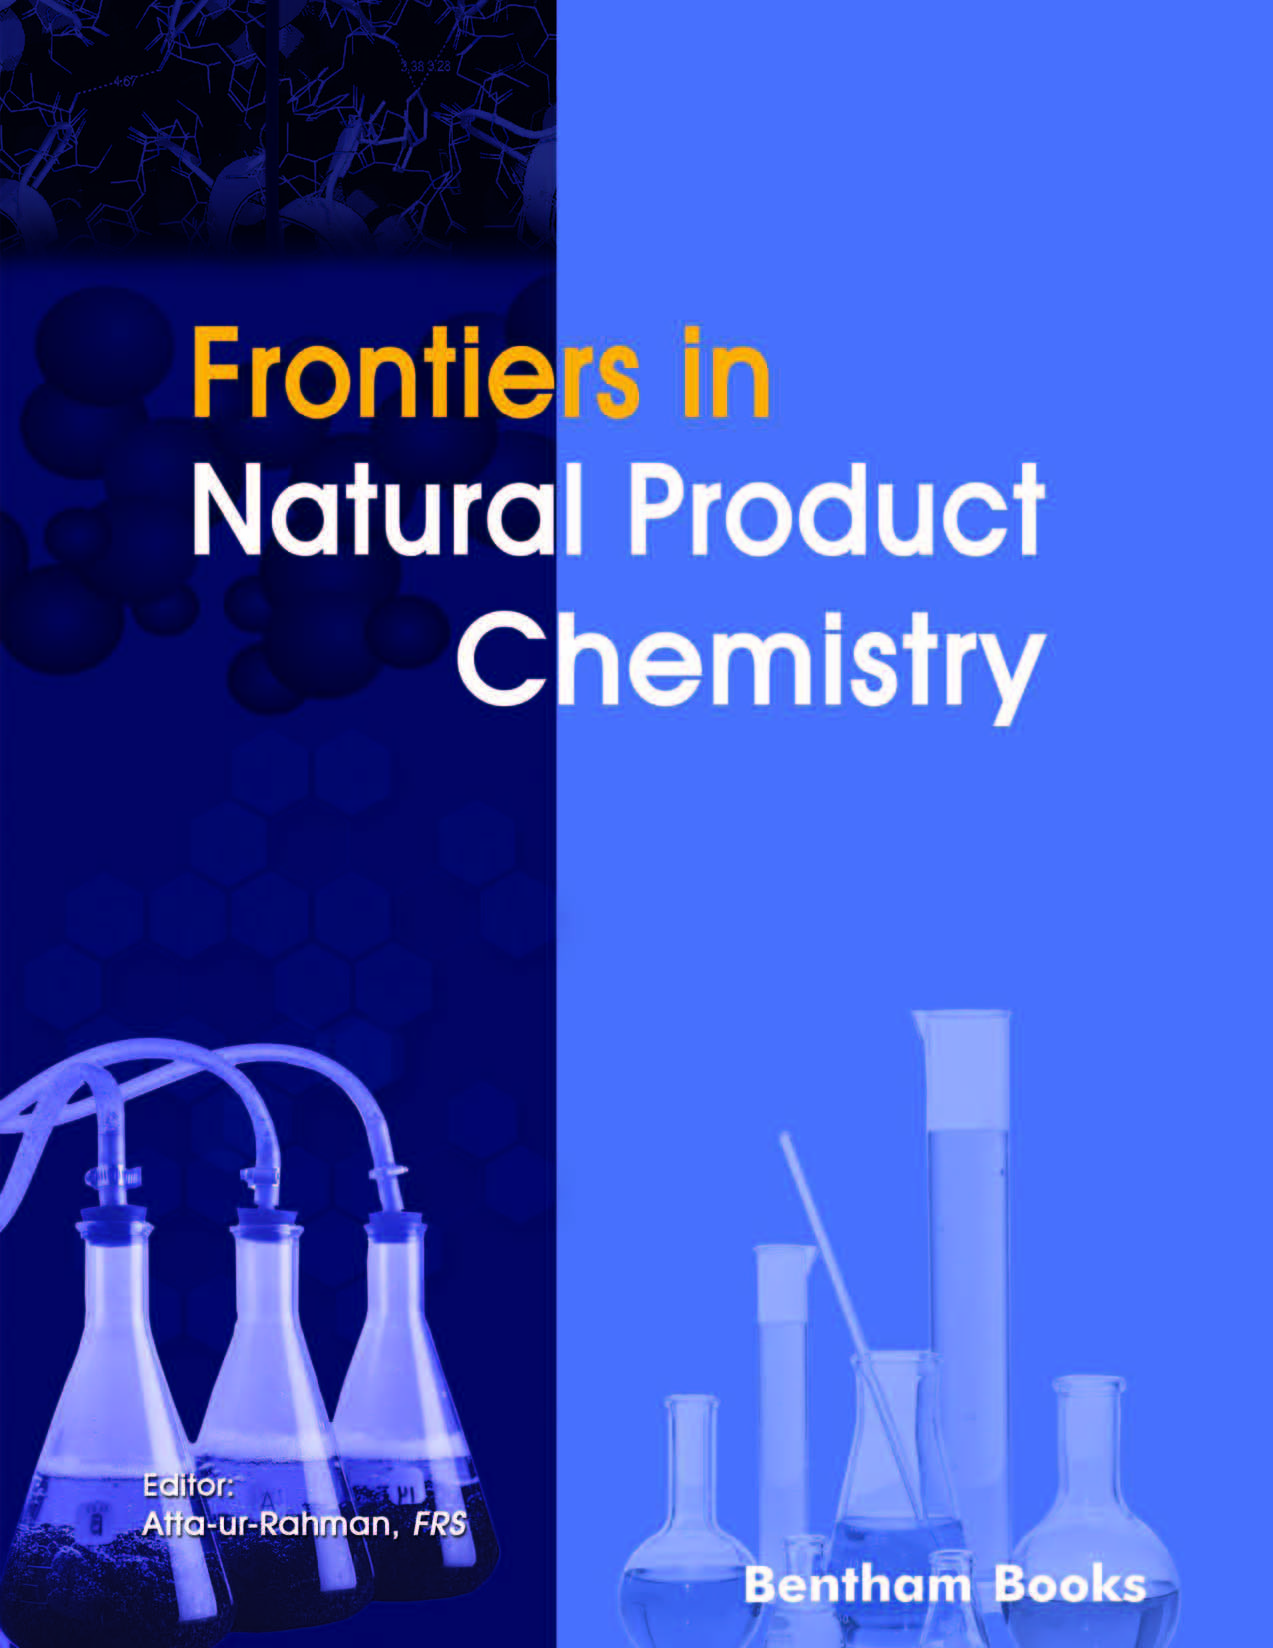 Frontiers in Natural Product Chemistry